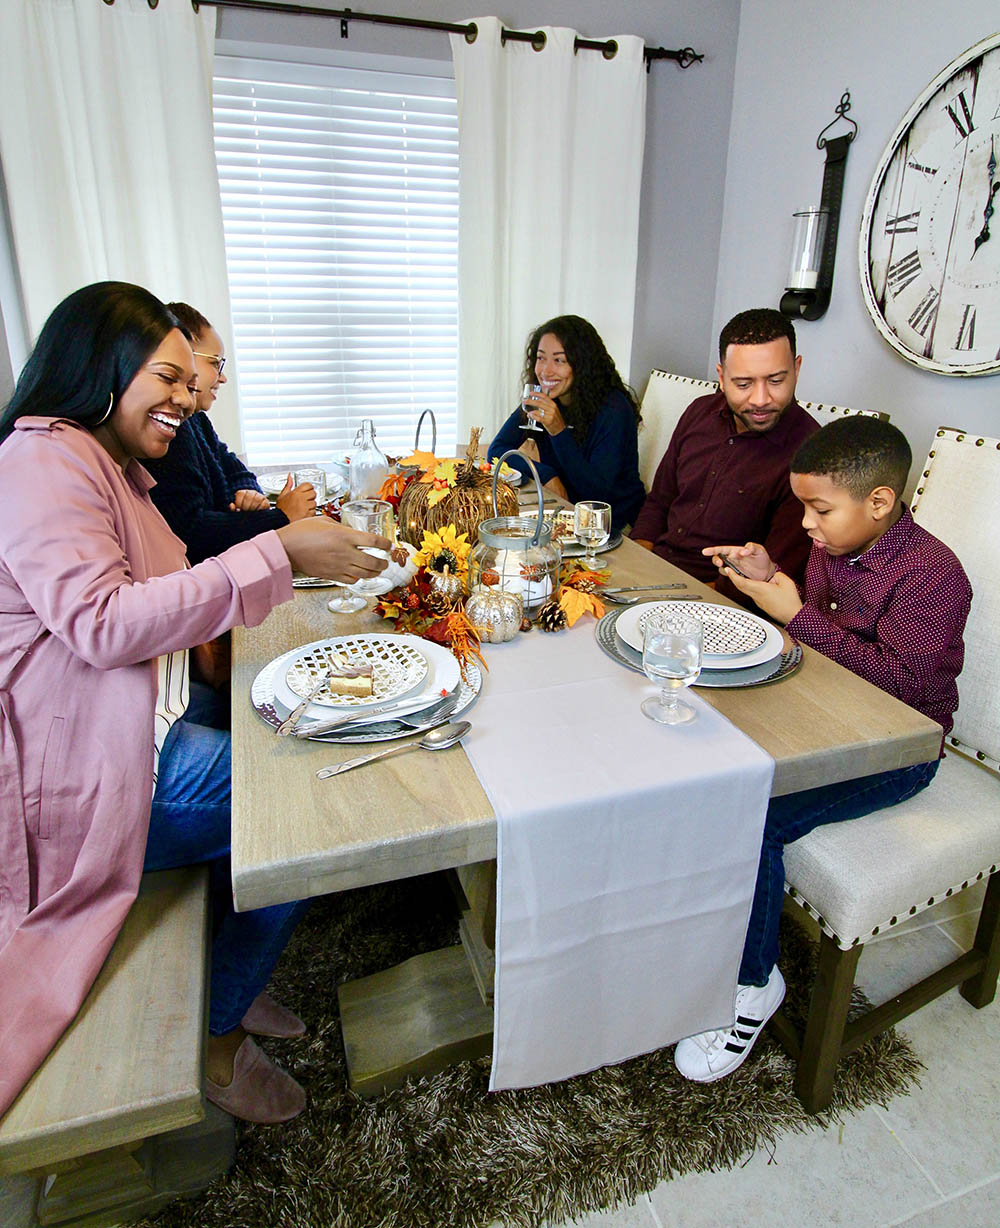 A group of people smiling around a table for Friendsgiving.